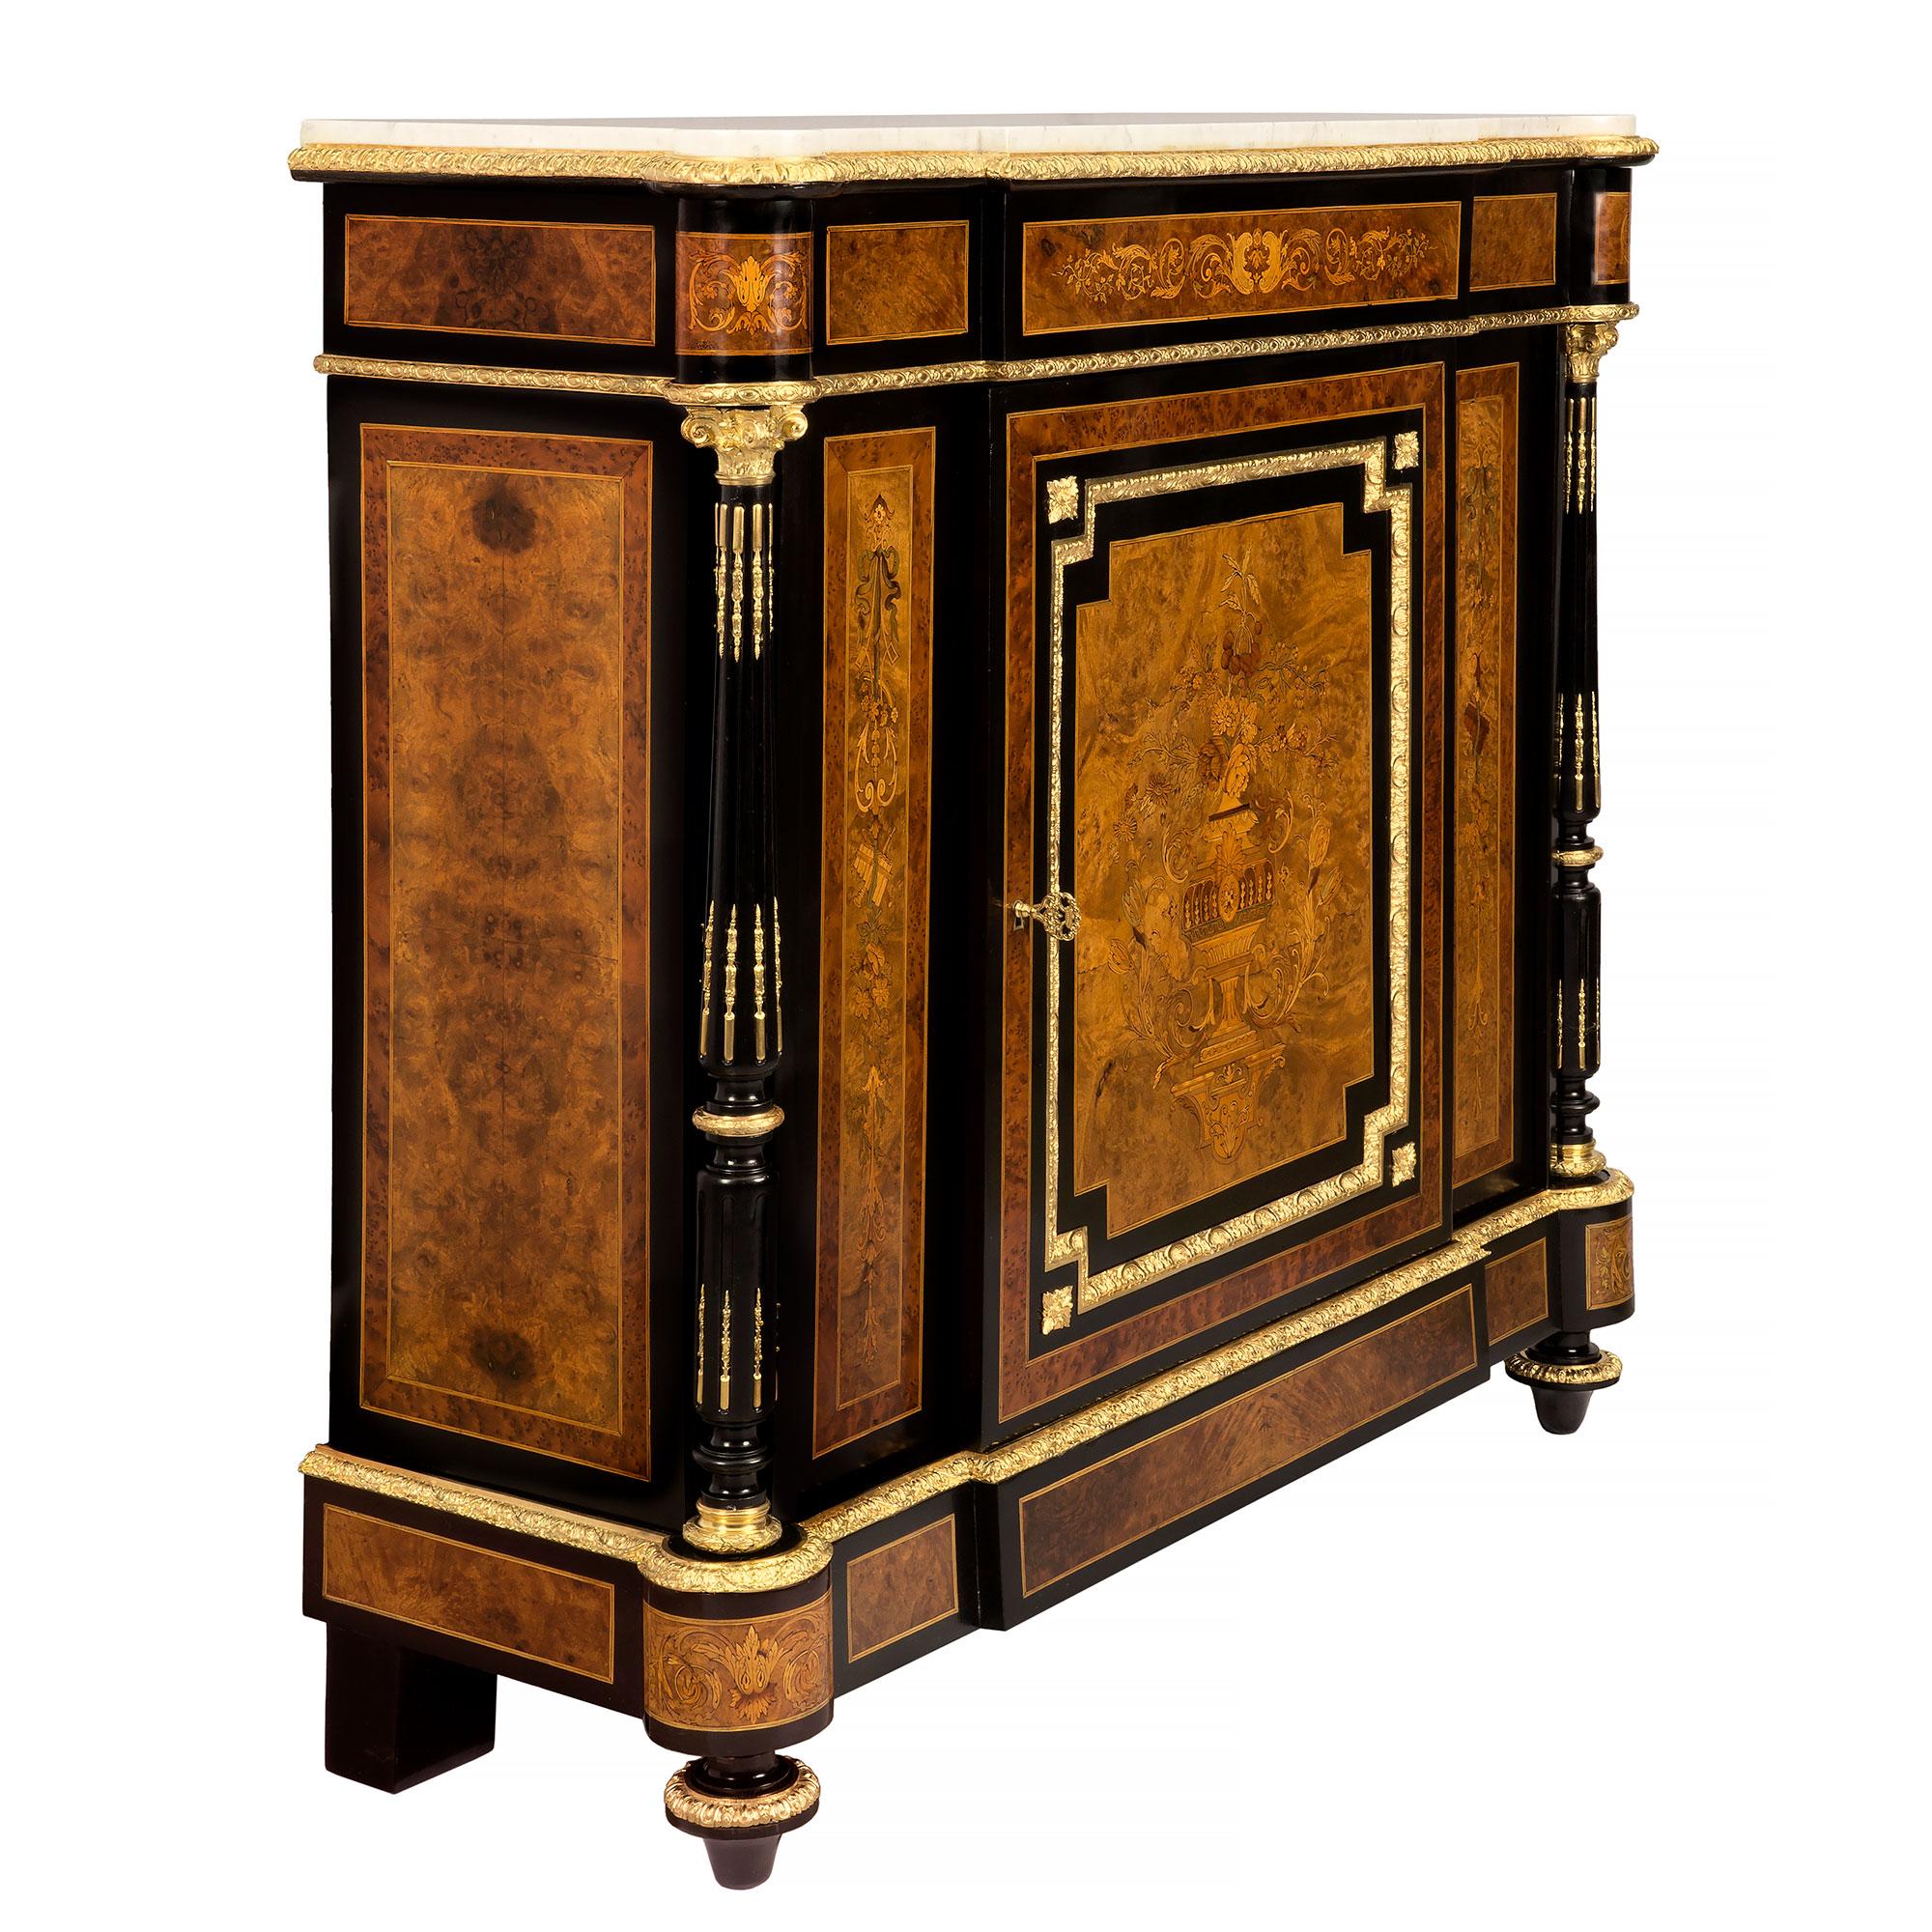 French 19th Century Napoleon III Period Exotic Wood, Ormolu and Marble Cabinet In Good Condition For Sale In West Palm Beach, FL